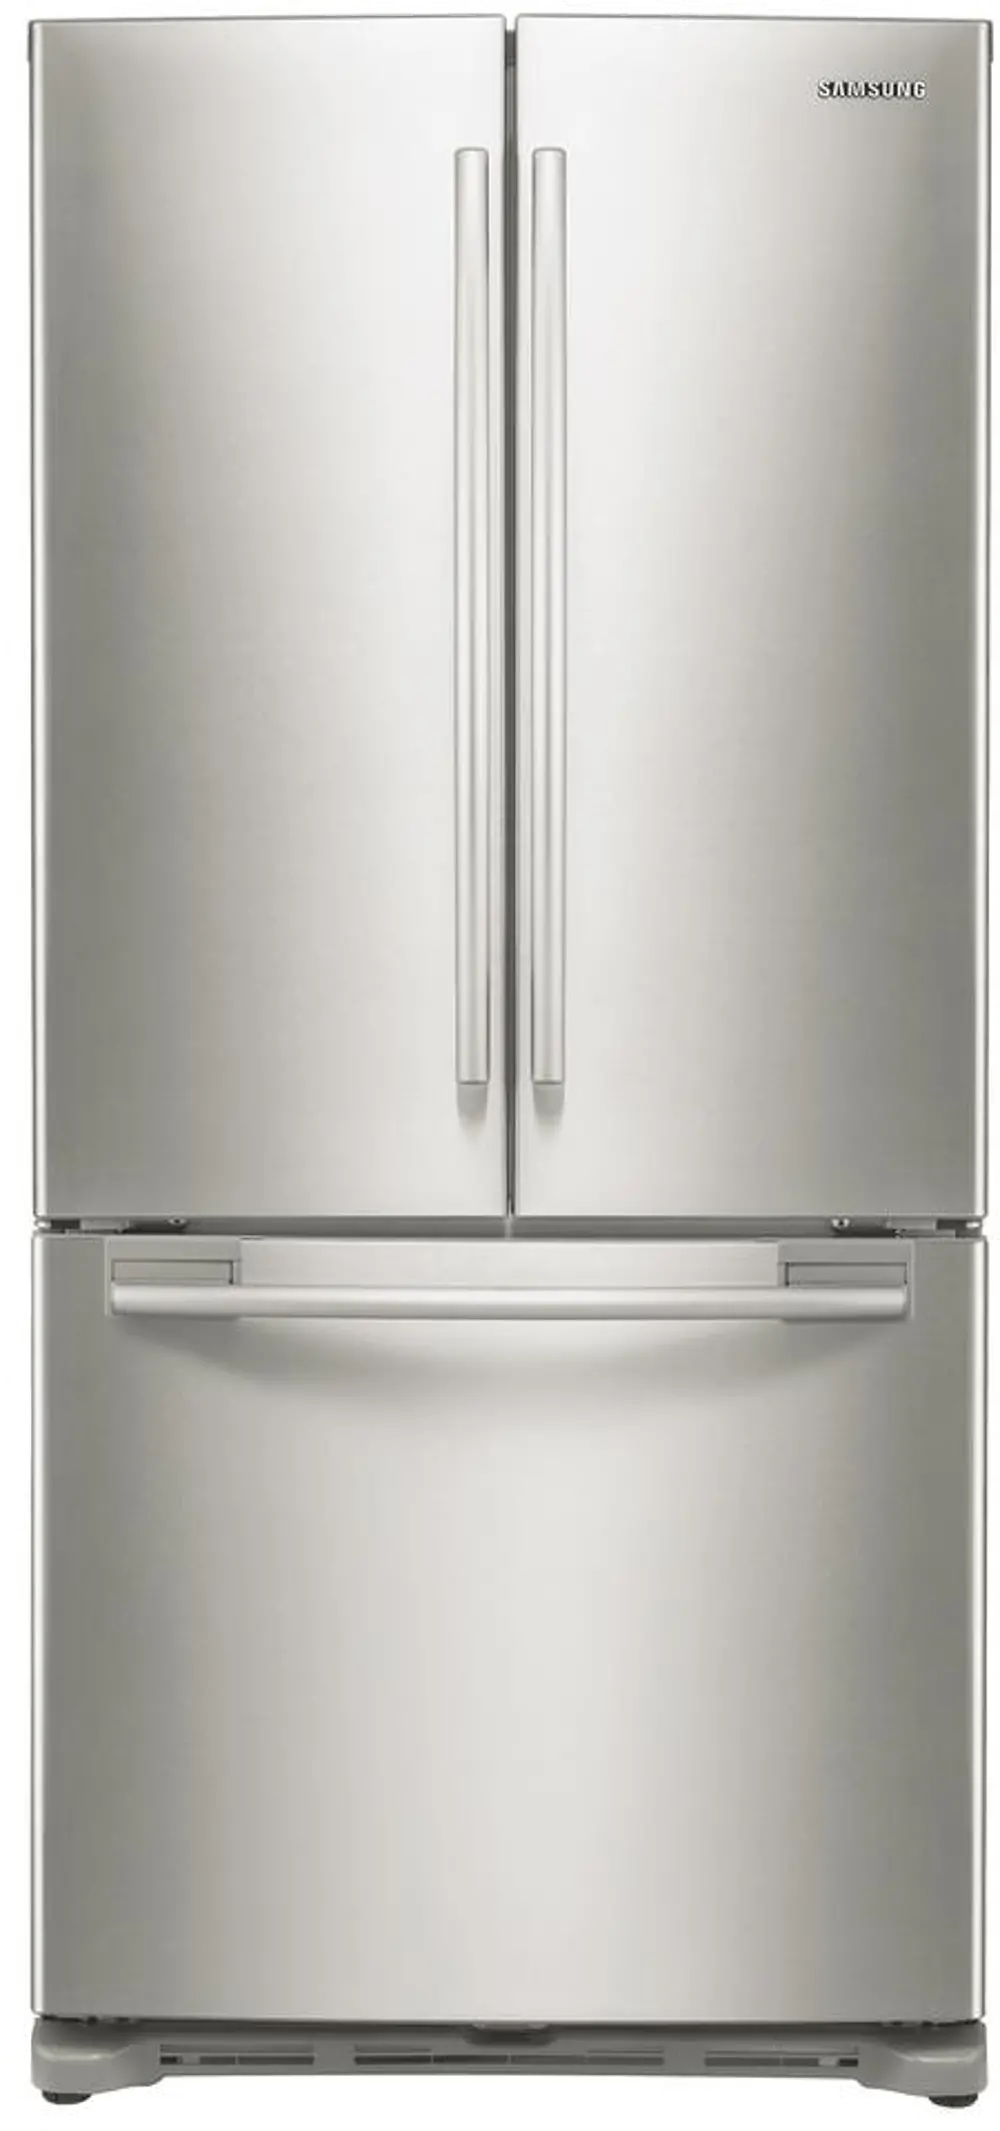 RF18HFENBSR-OLD Samsung  Stainless Steel Wide Counter Depth Refrigerator - 33 Inch-1